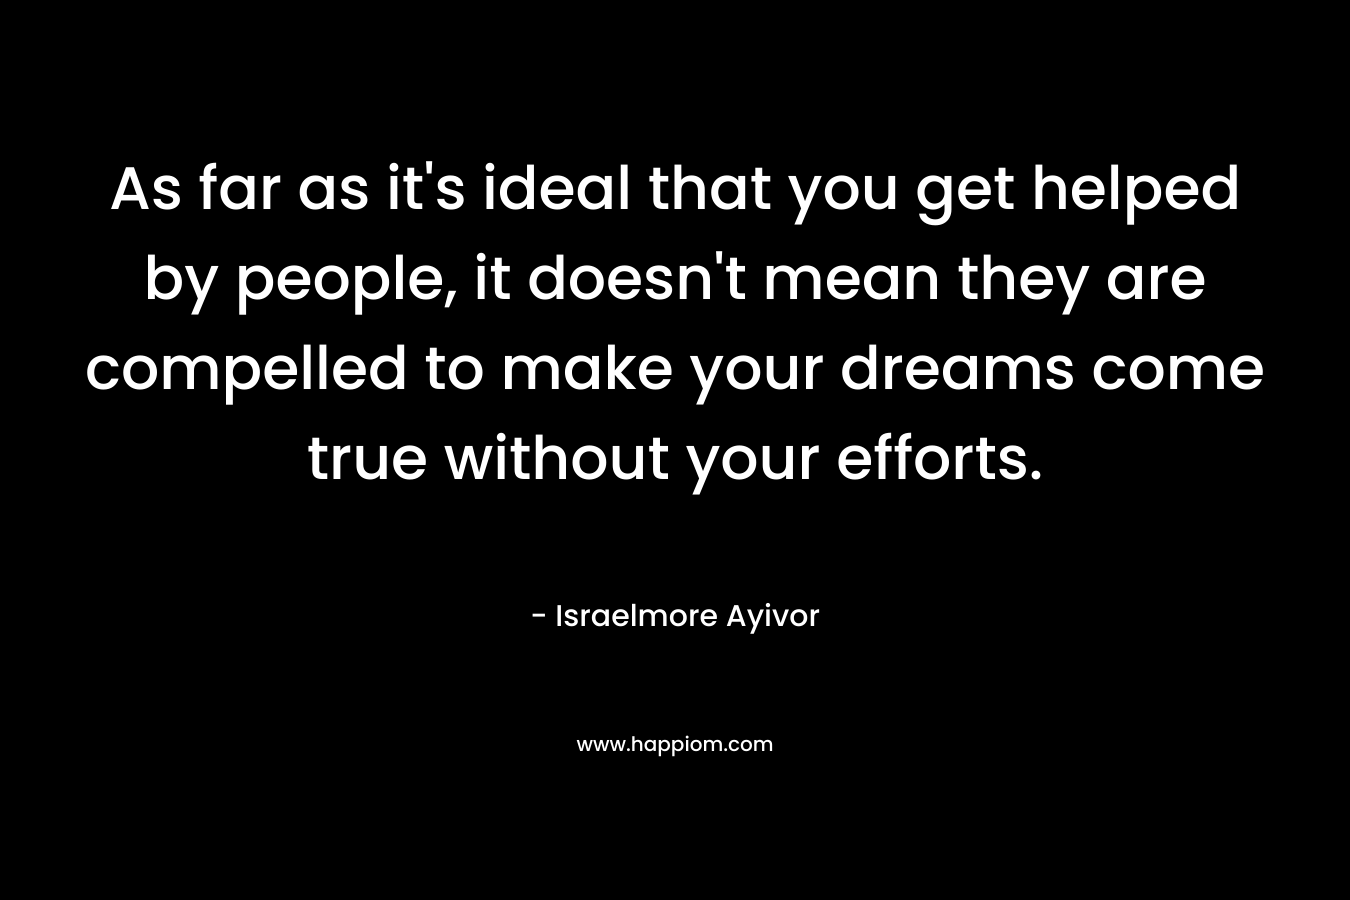 As far as it’s ideal that you get helped by people, it doesn’t mean they are compelled to make your dreams come true without your efforts. – Israelmore Ayivor